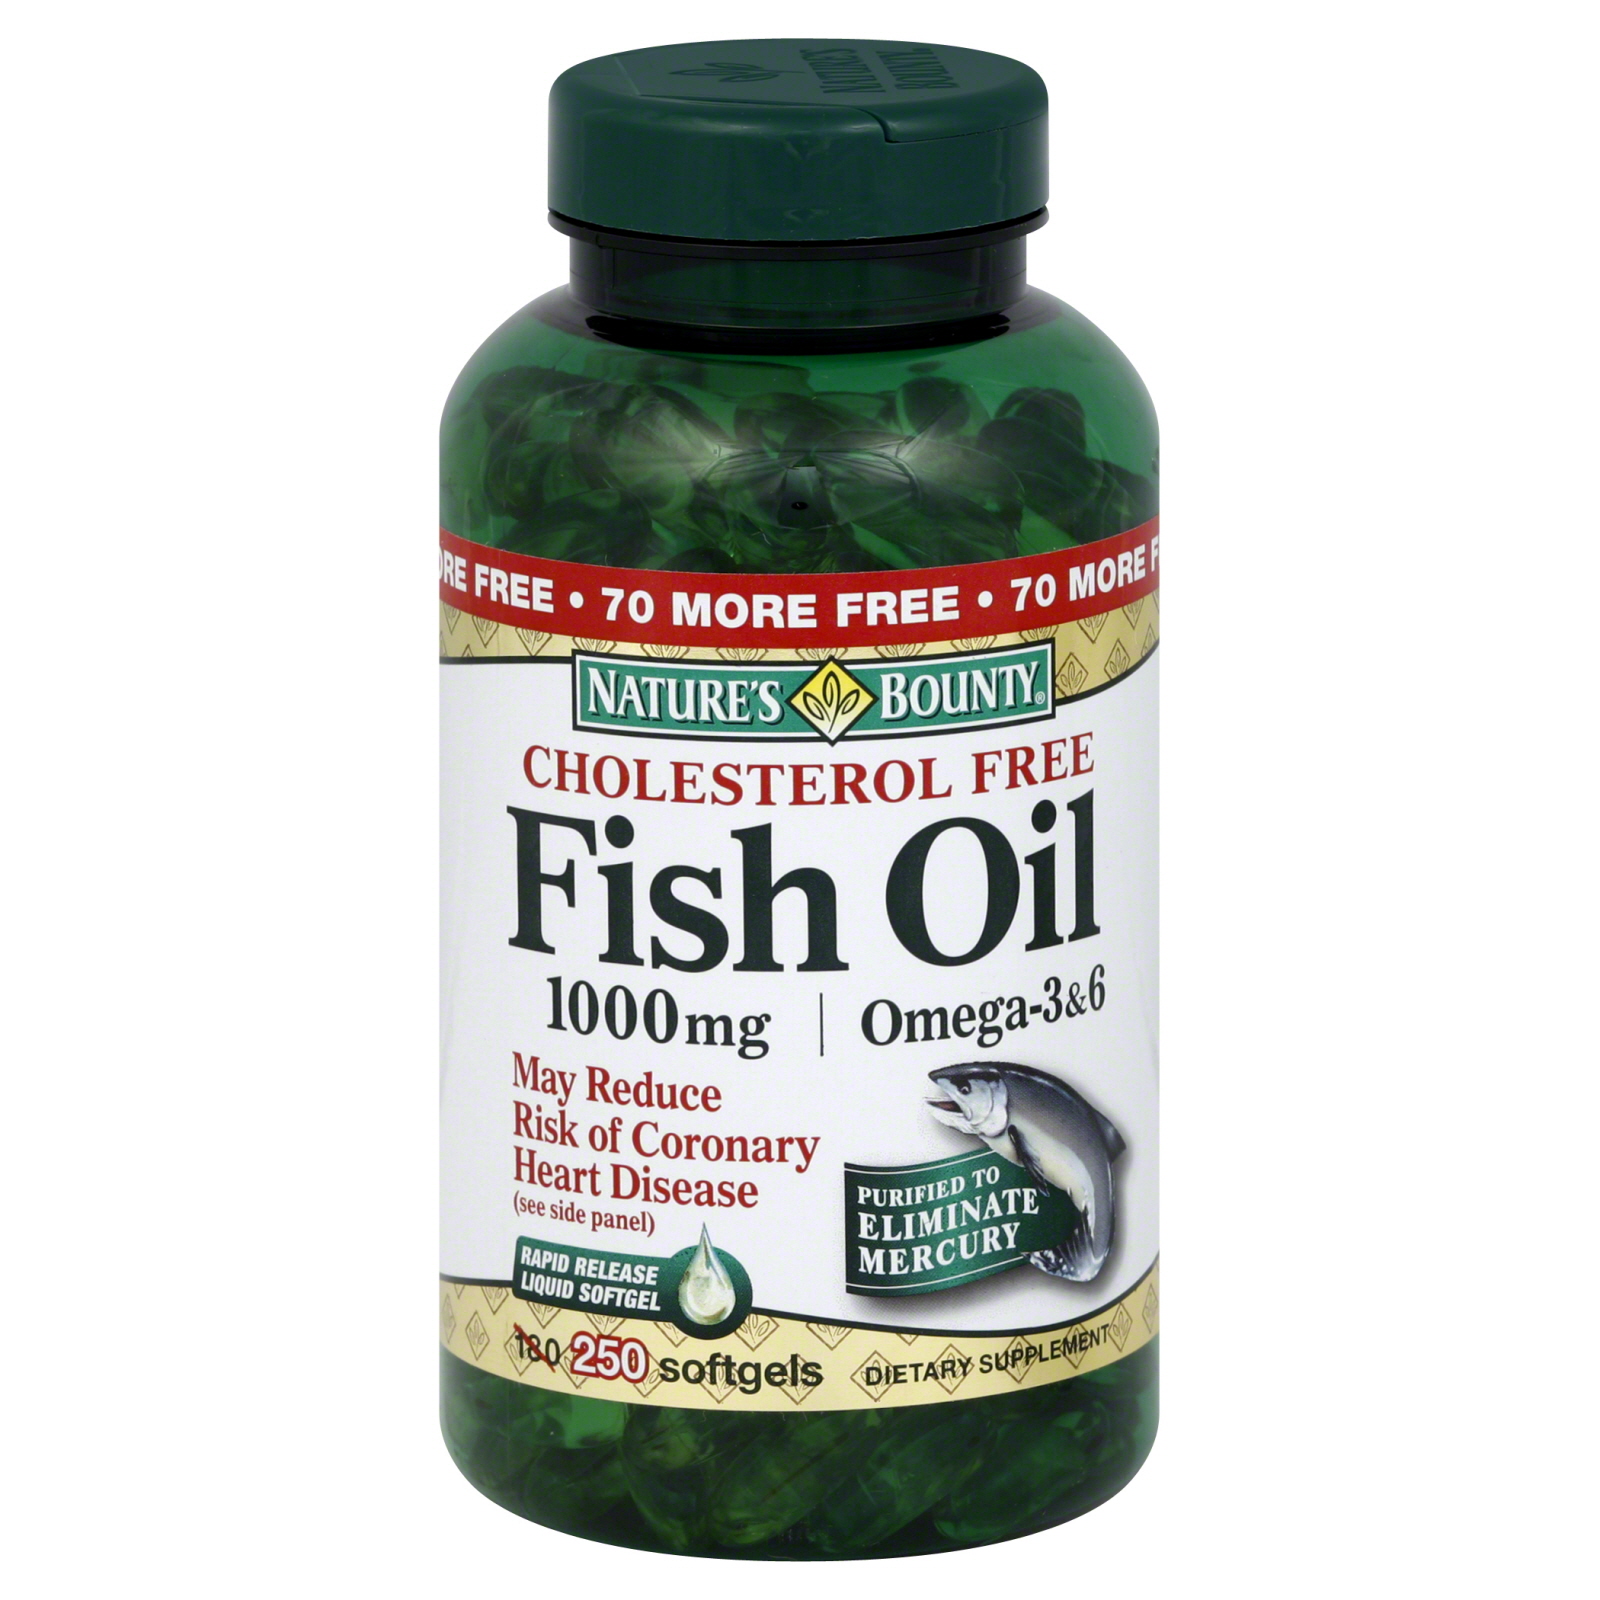 Nature's Bounty Omega-3 Fish Oil 1000mg Softgels 180 Count